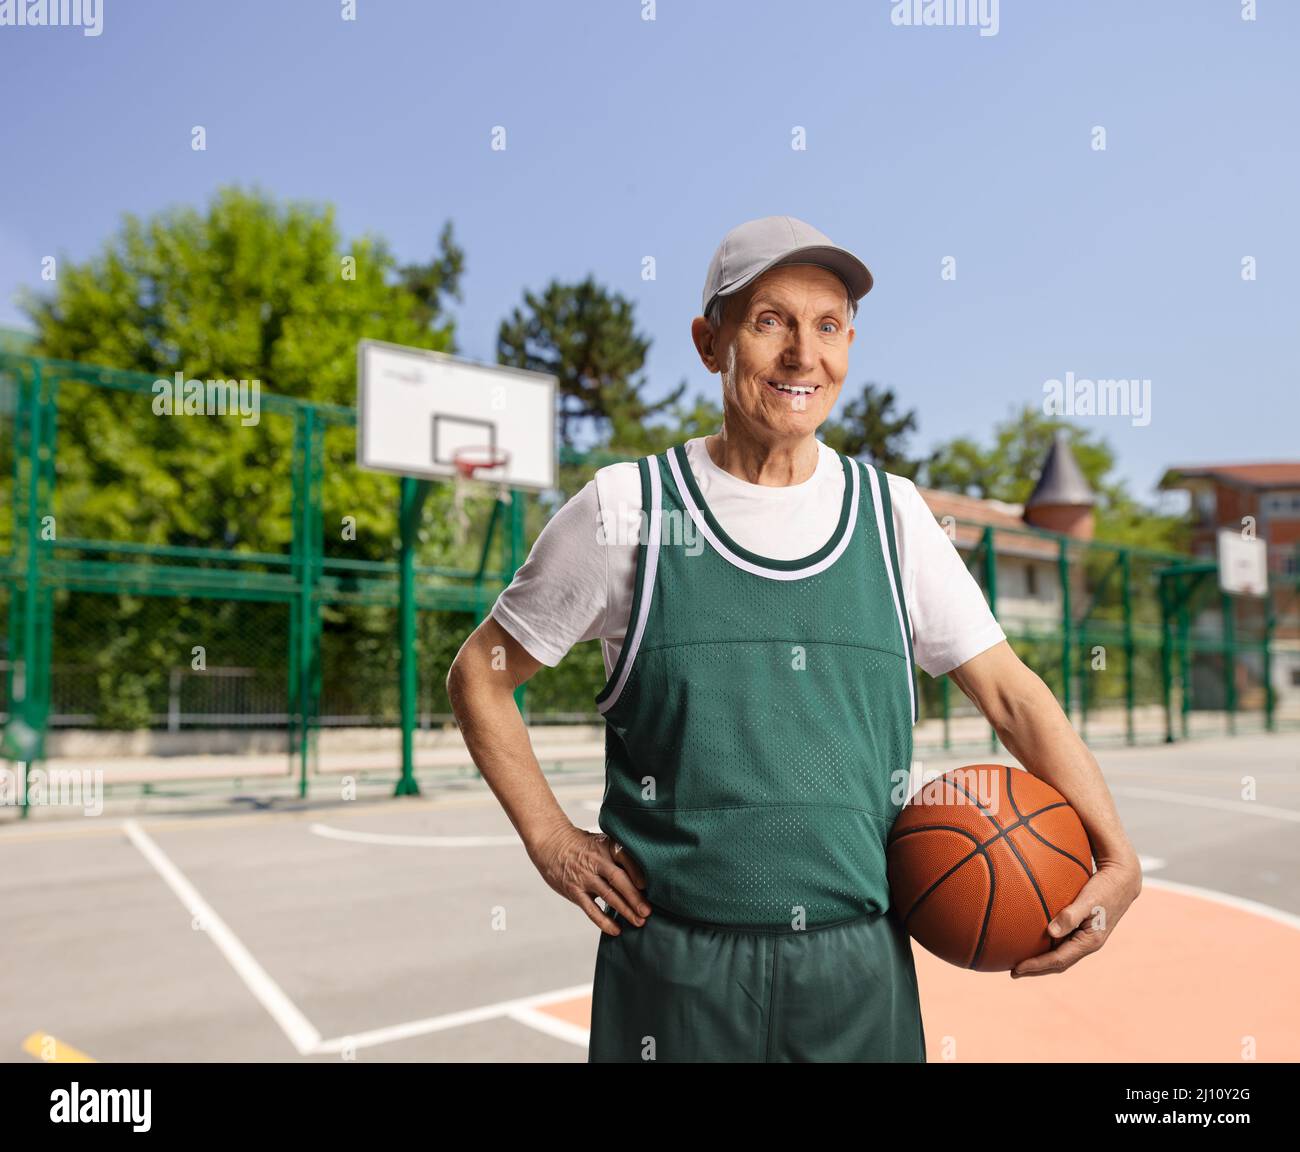 Smiling elderly man holding a basketball on an outdoor basketball court Stock Photo